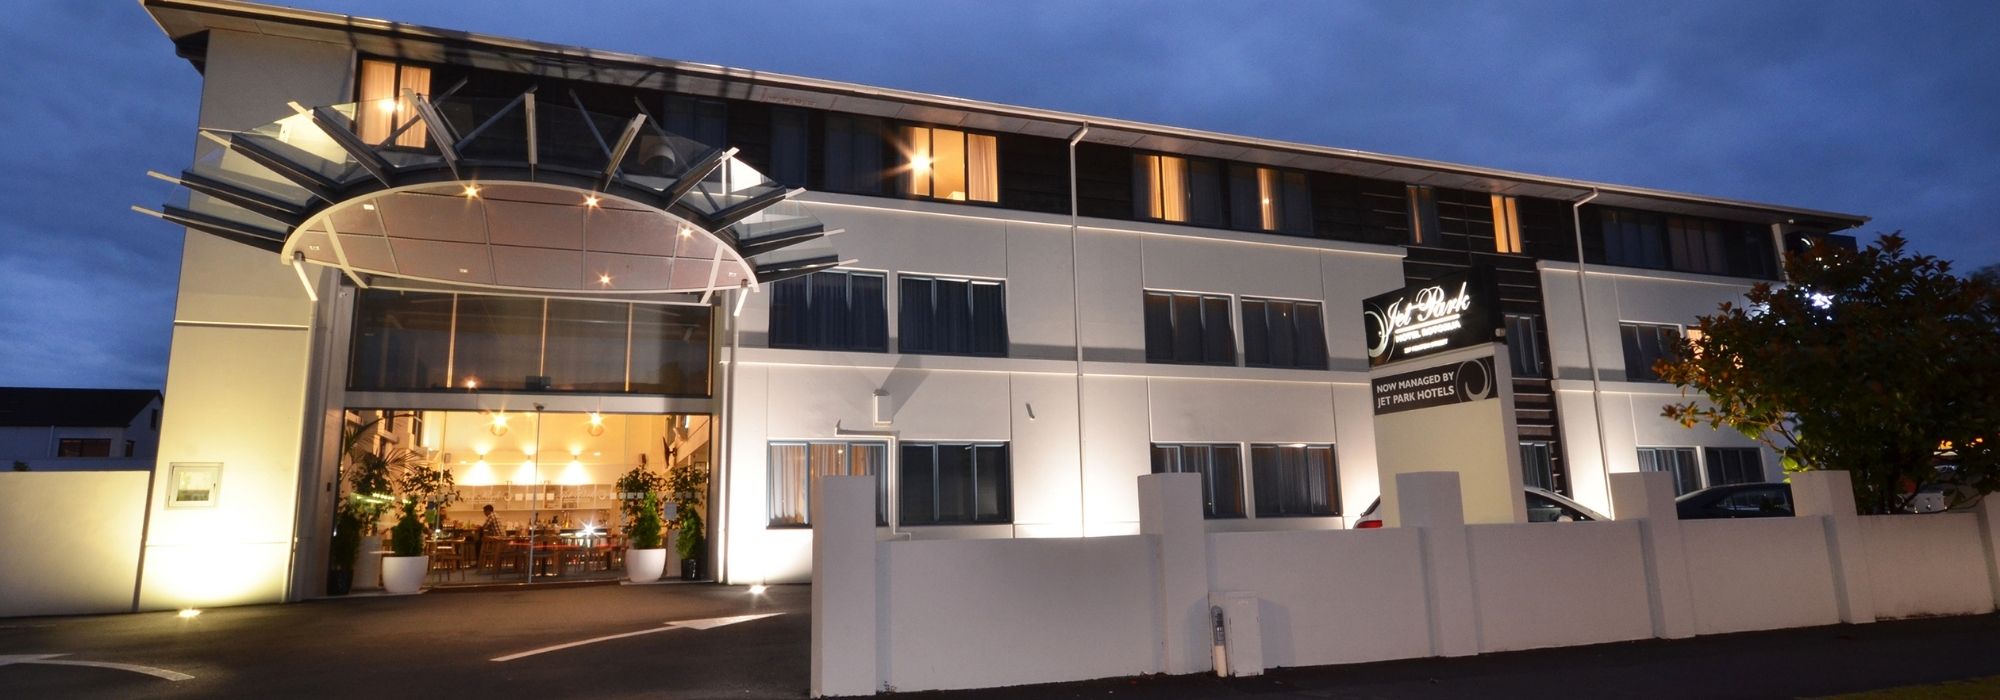 An in-depth look into commercial accommodation in Rotorua